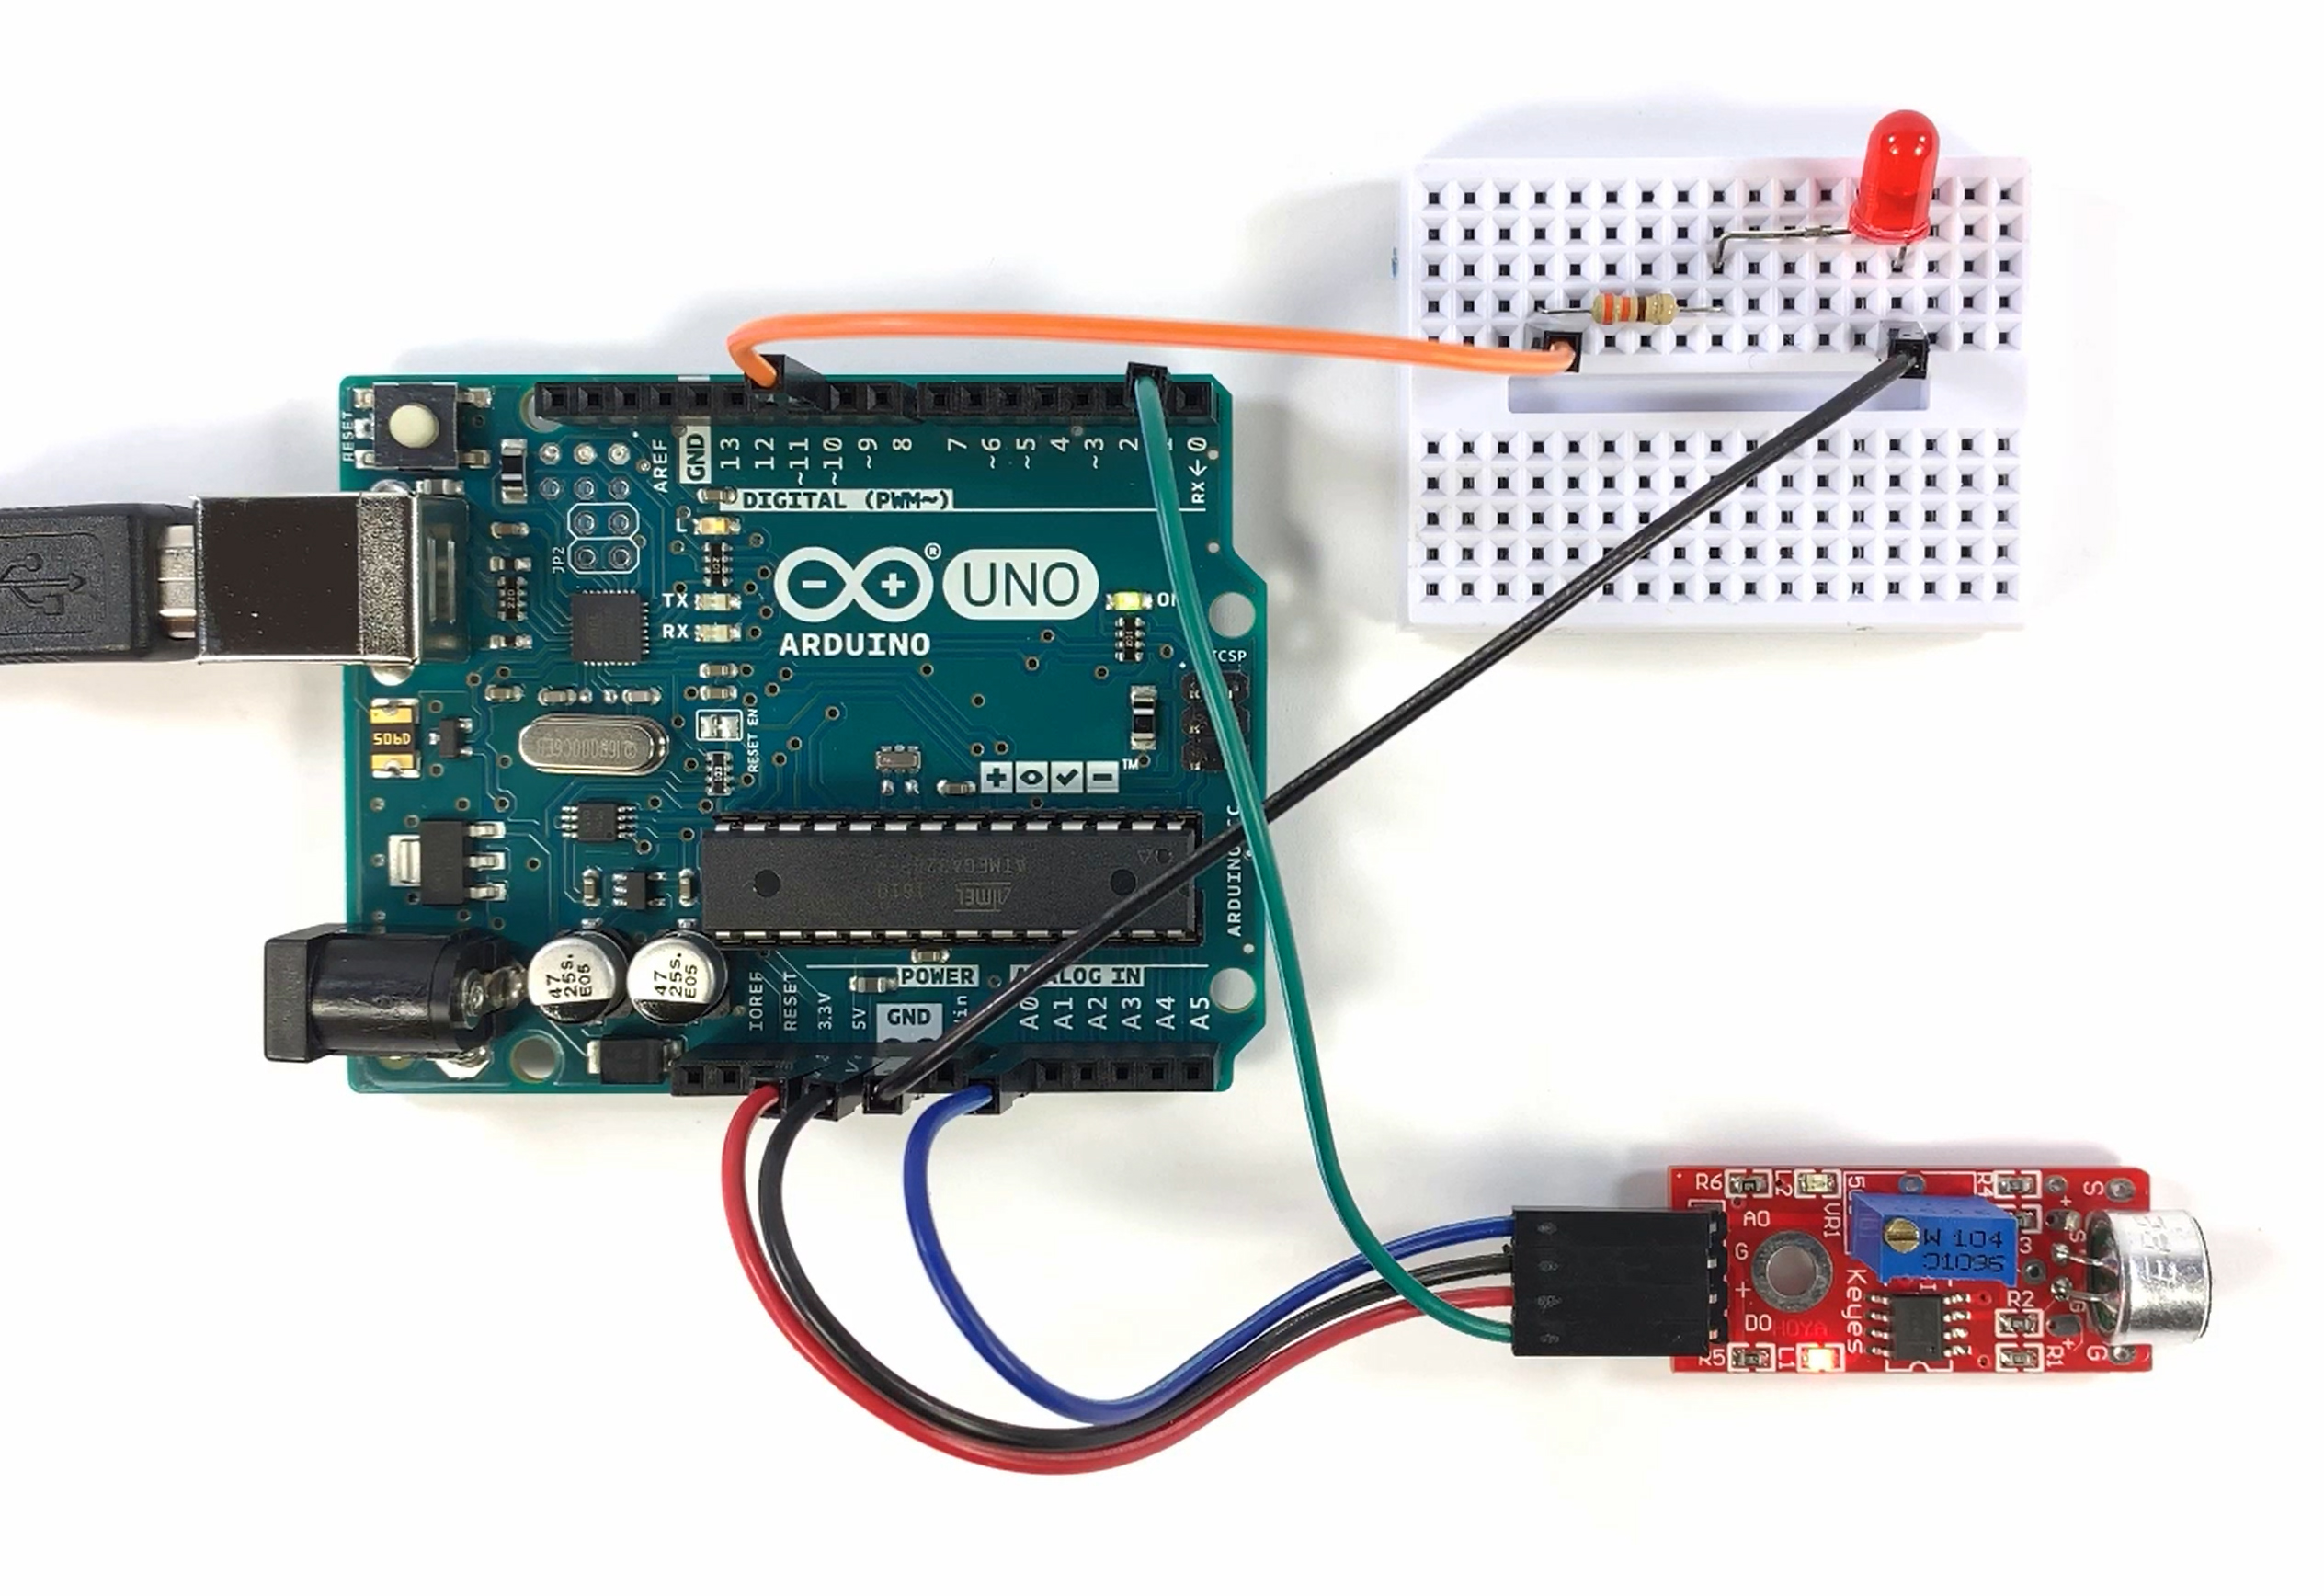 How to Use the Arduino - Circuit Basics